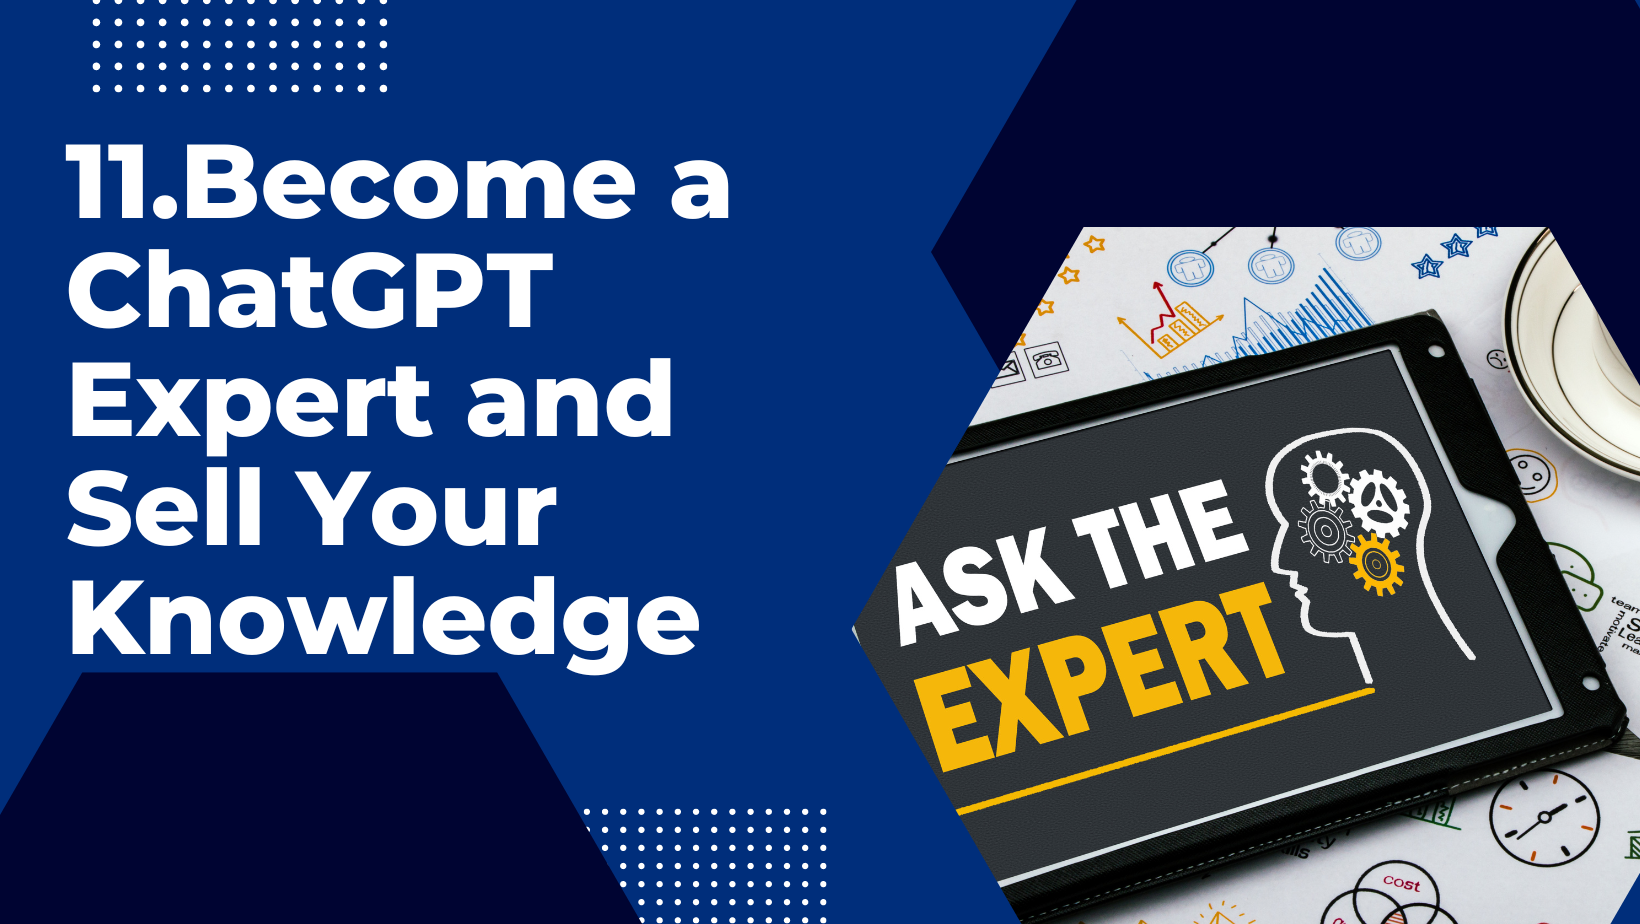 Become a ChatGPT Expert and Sell Your Knowledge